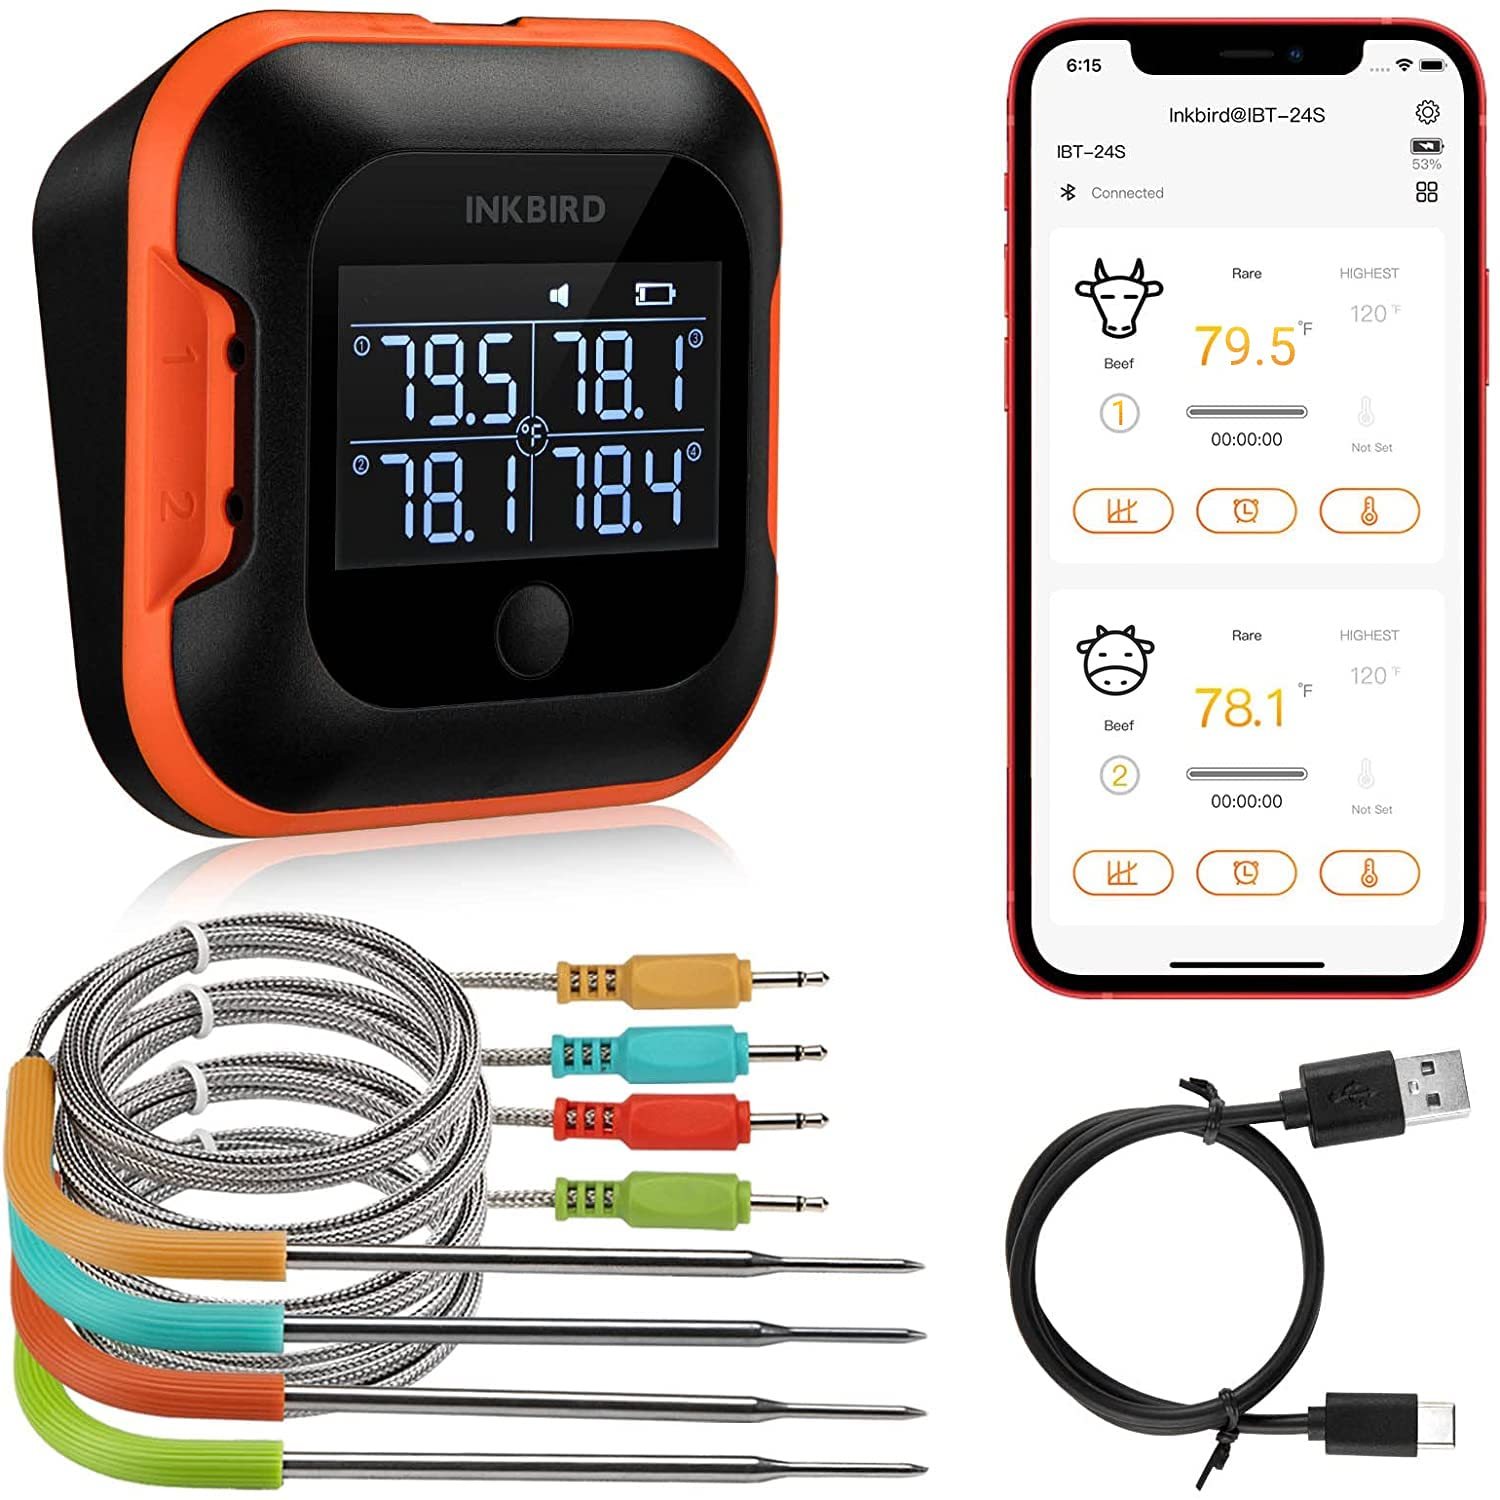 Inkbird Wifi Grill Meat Thermometer IBBQ-4T with 4 Colored Probes, Wireless  Bar